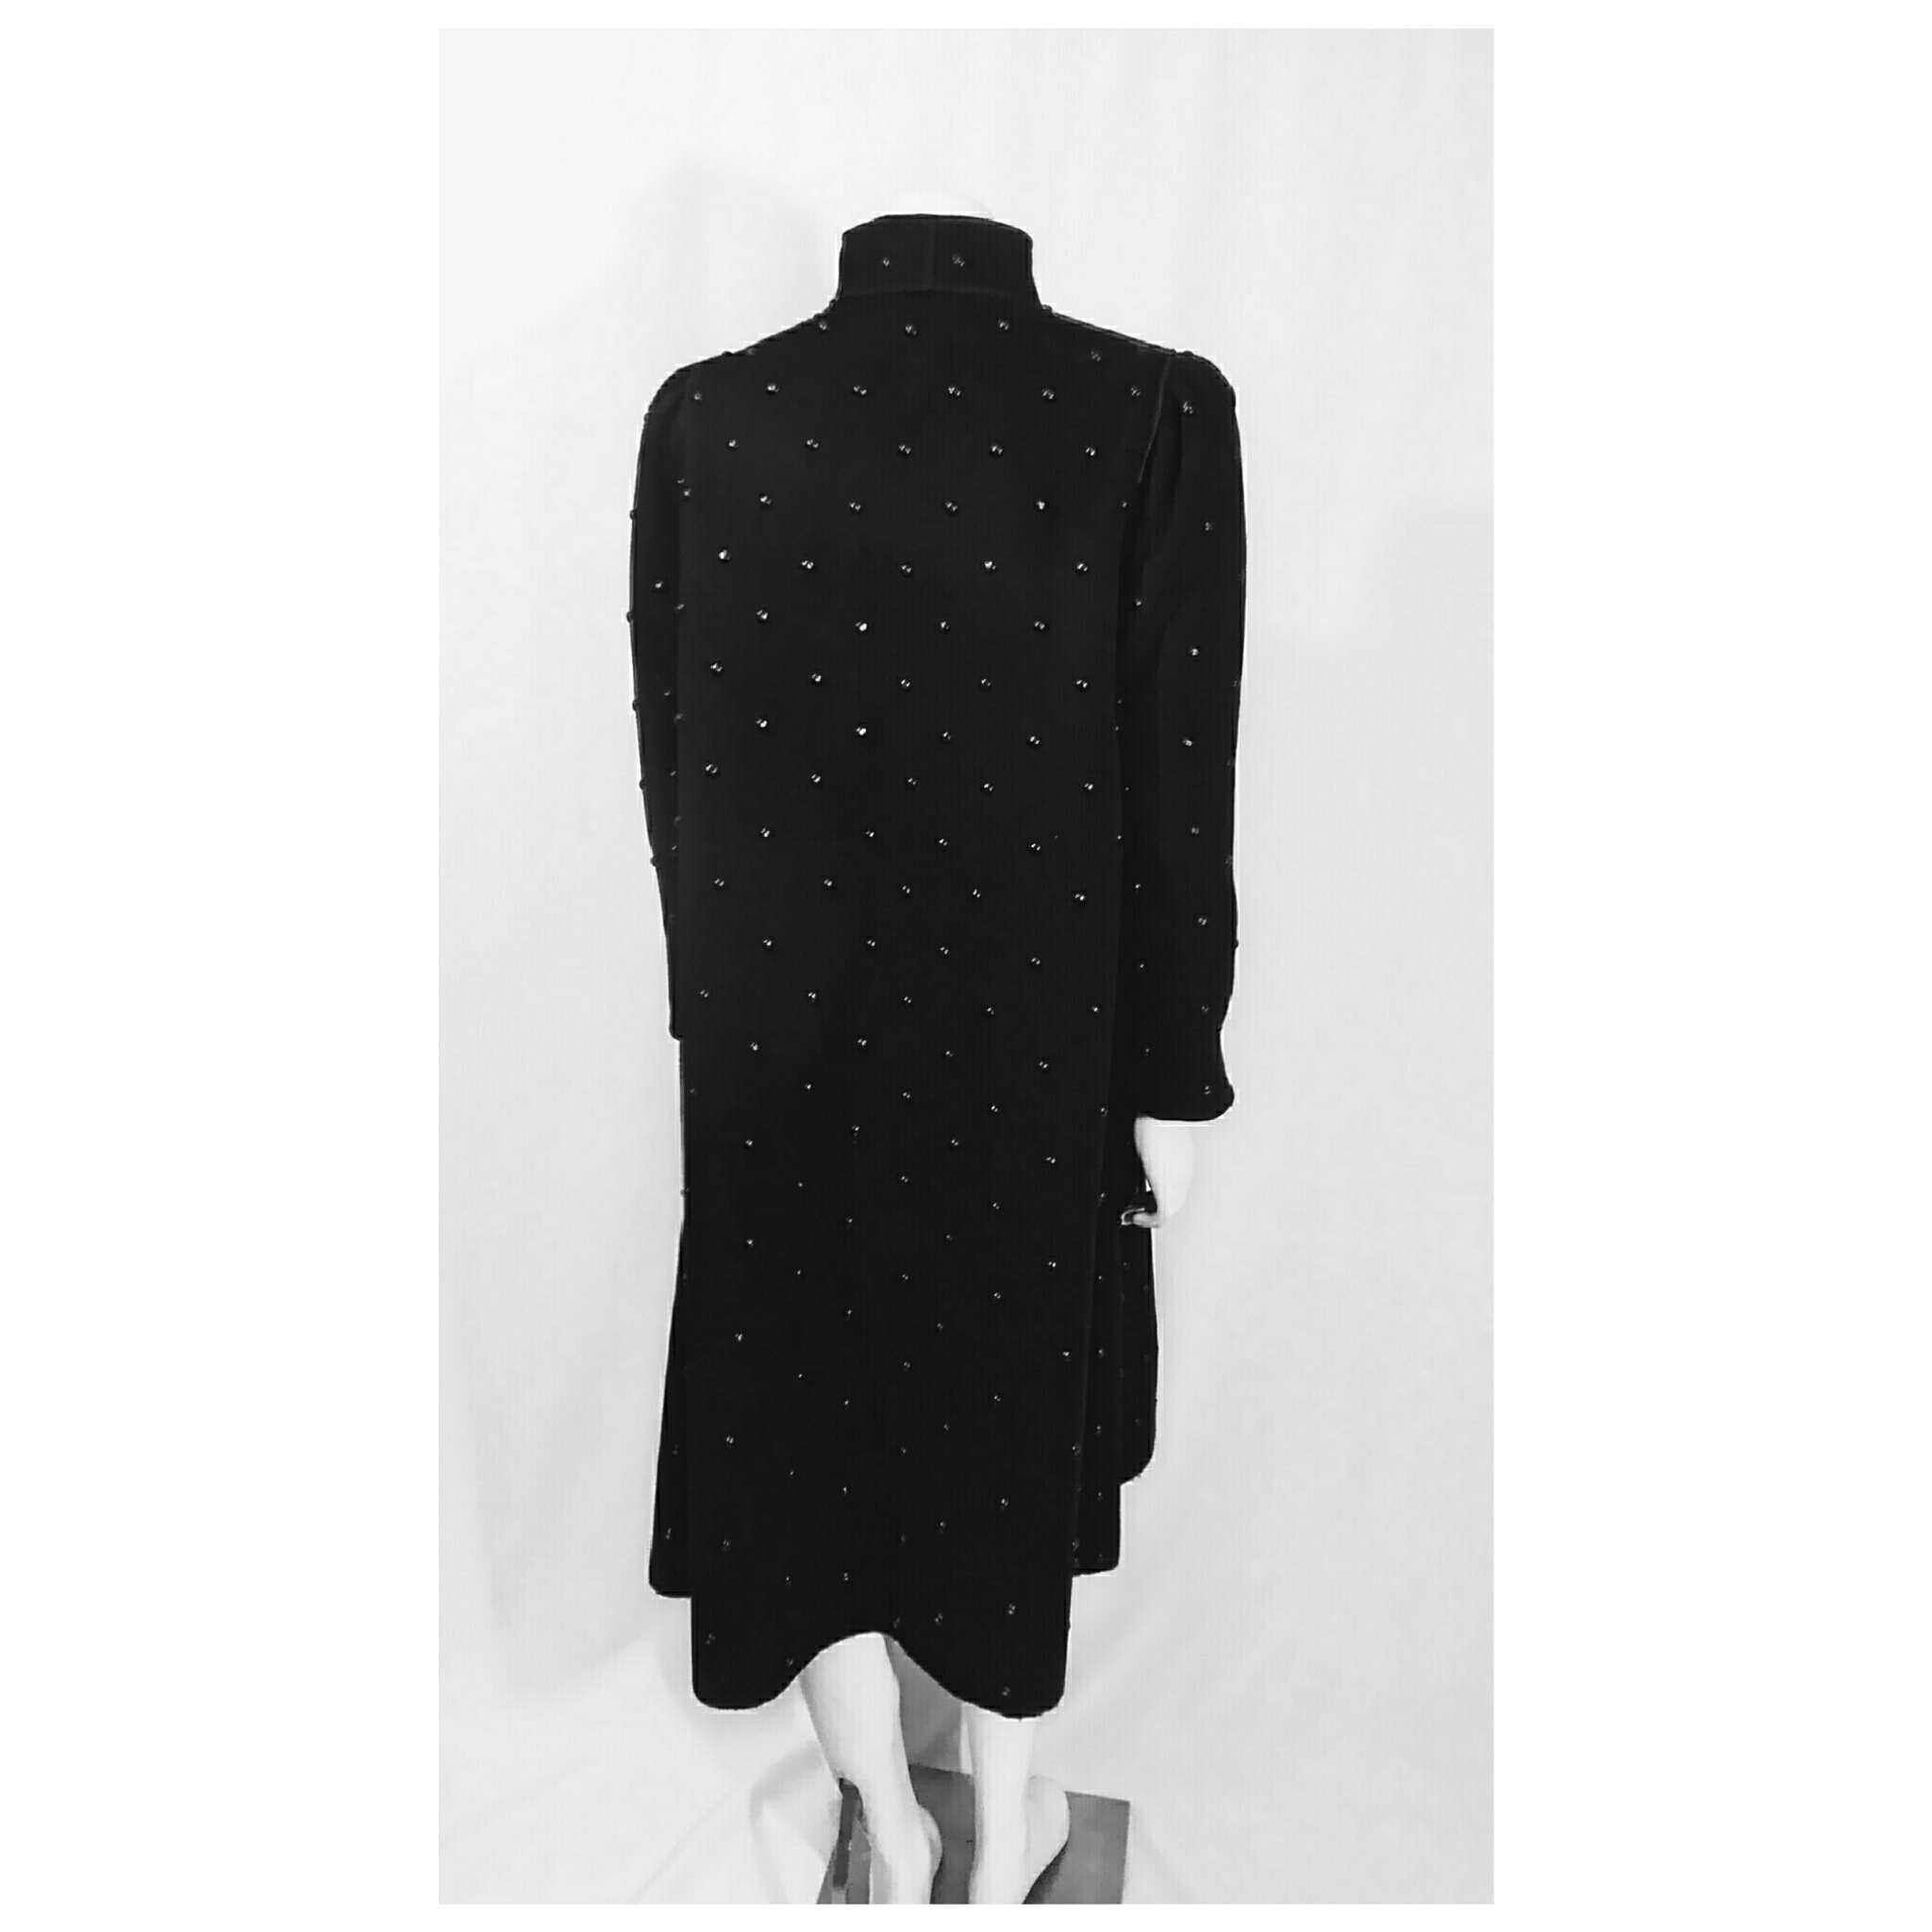 Vintage 1970's Rare Mrs. H. Winter Beaded Embellished Black Wool Coat with Matching Suede Scarf; Black Wool Embellished Coat; Harriet Winter